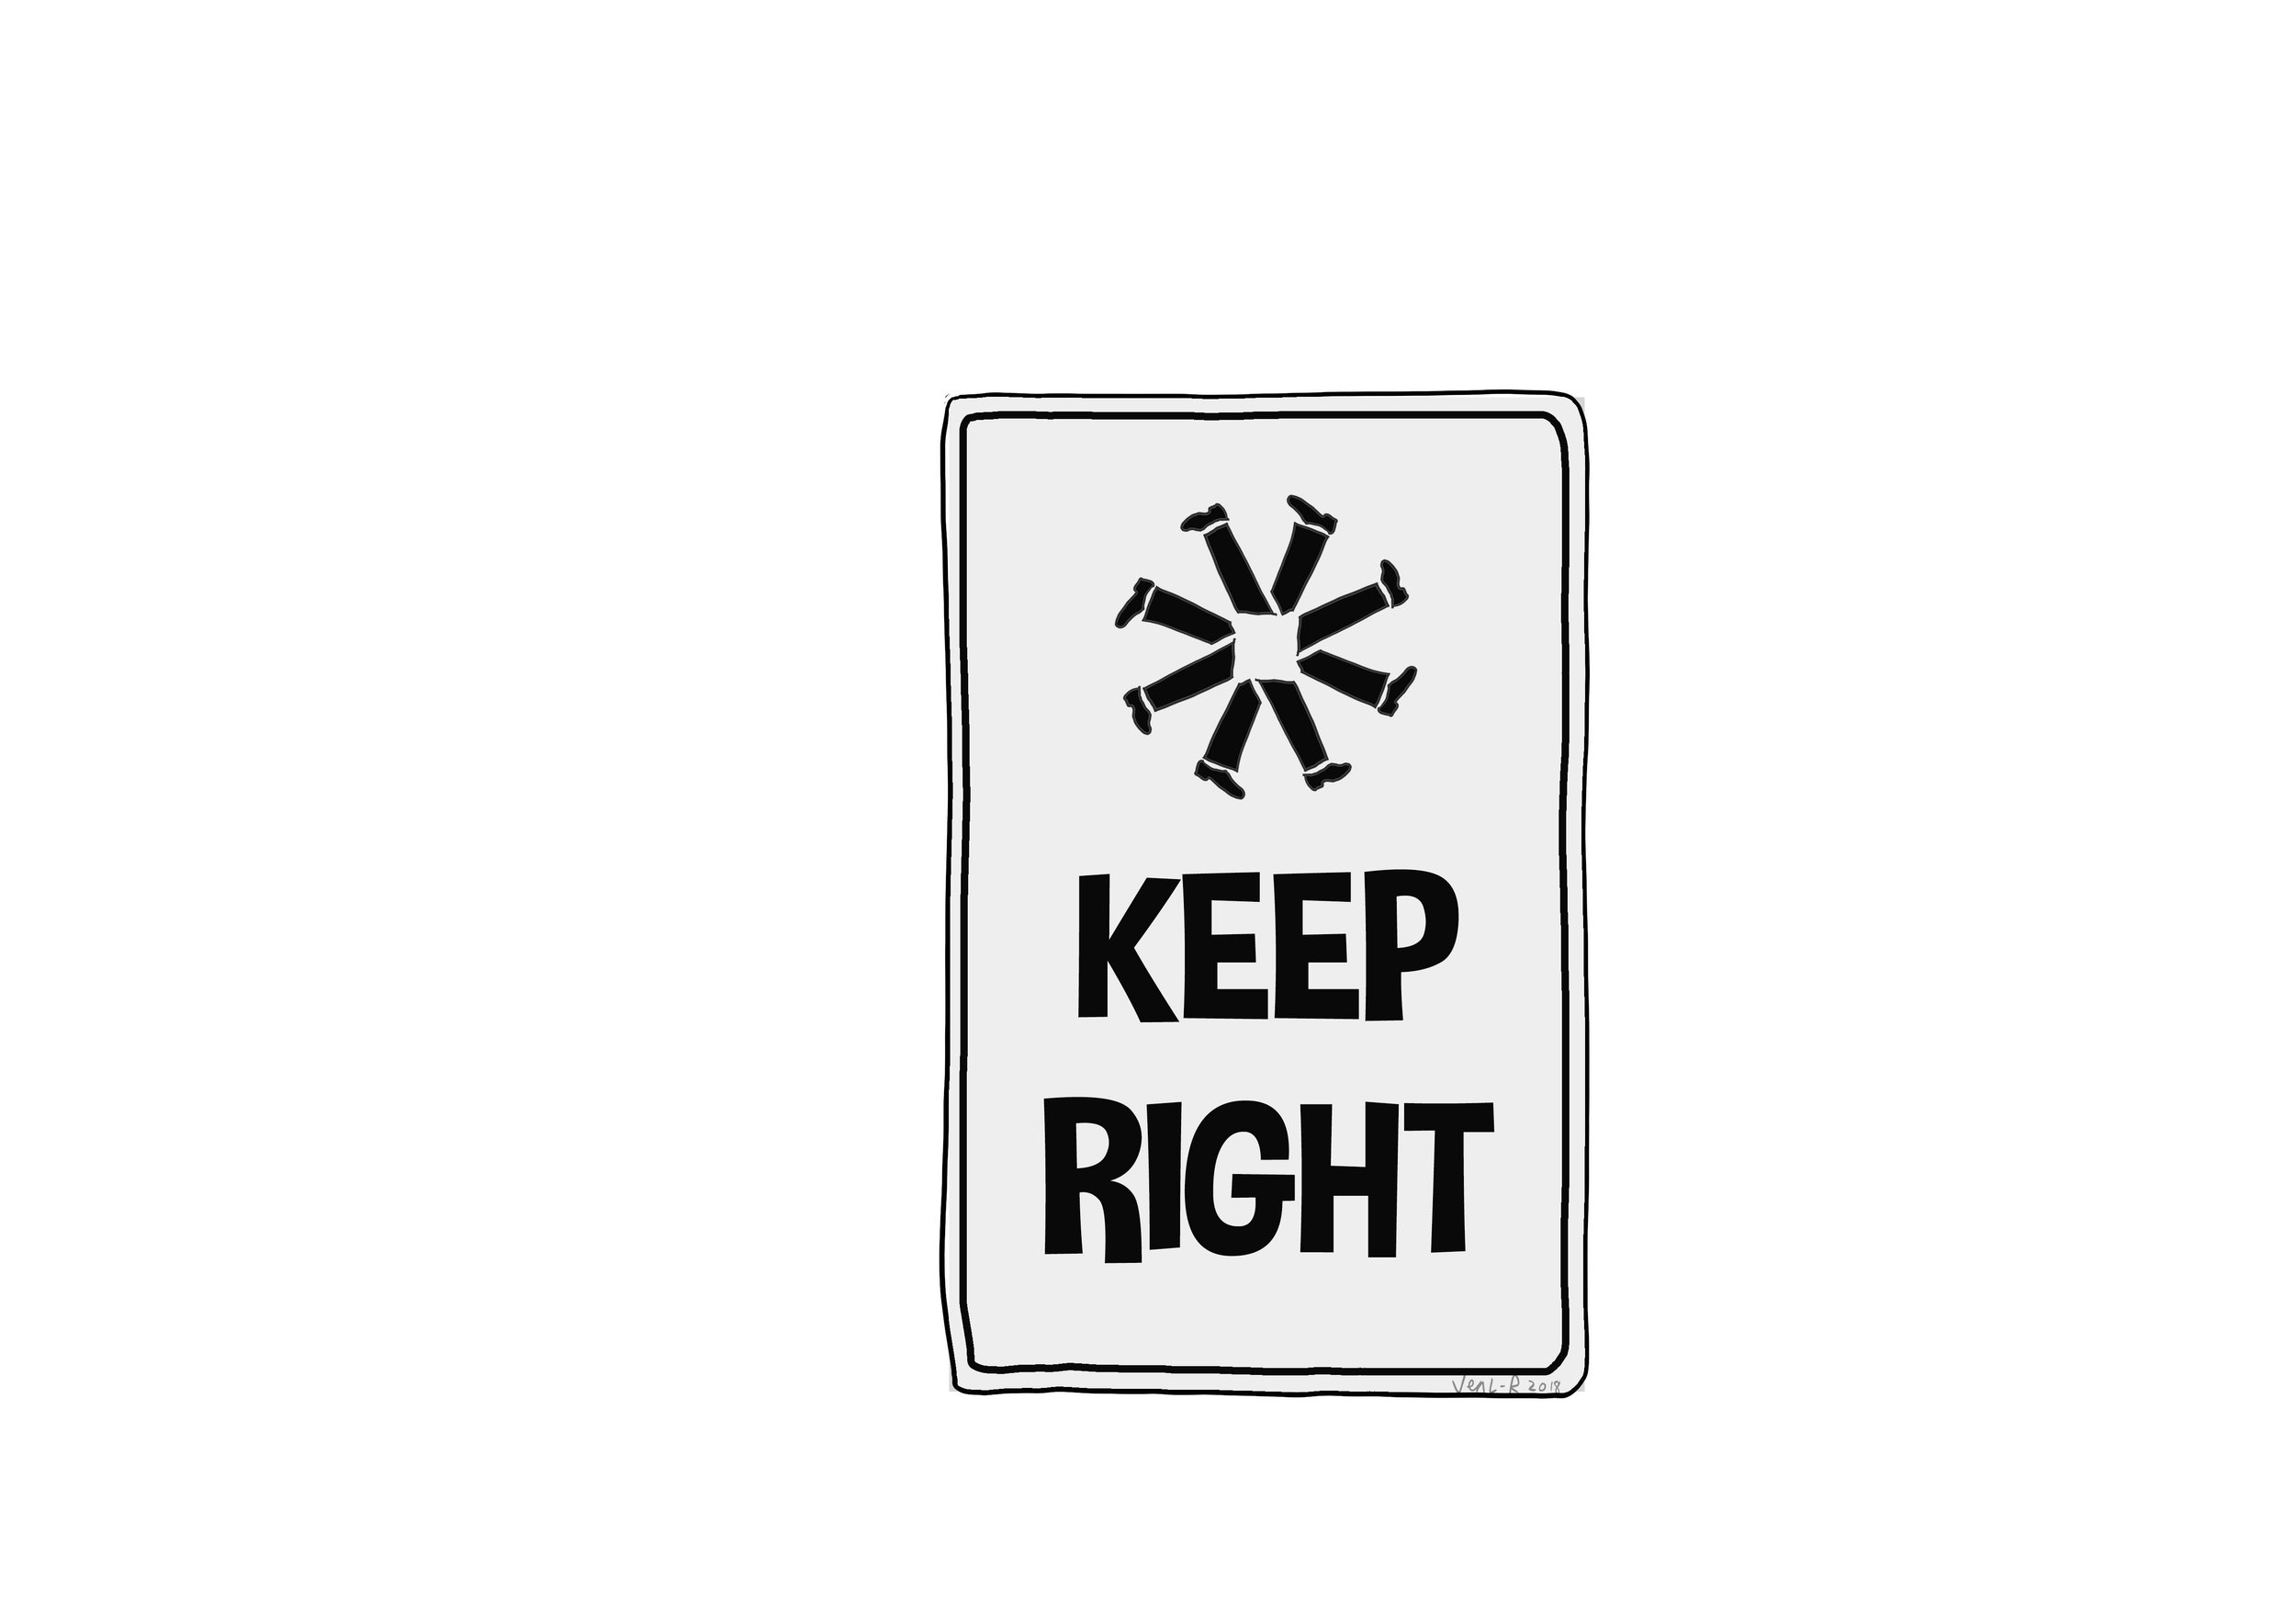 Signs-keep-right.jpg